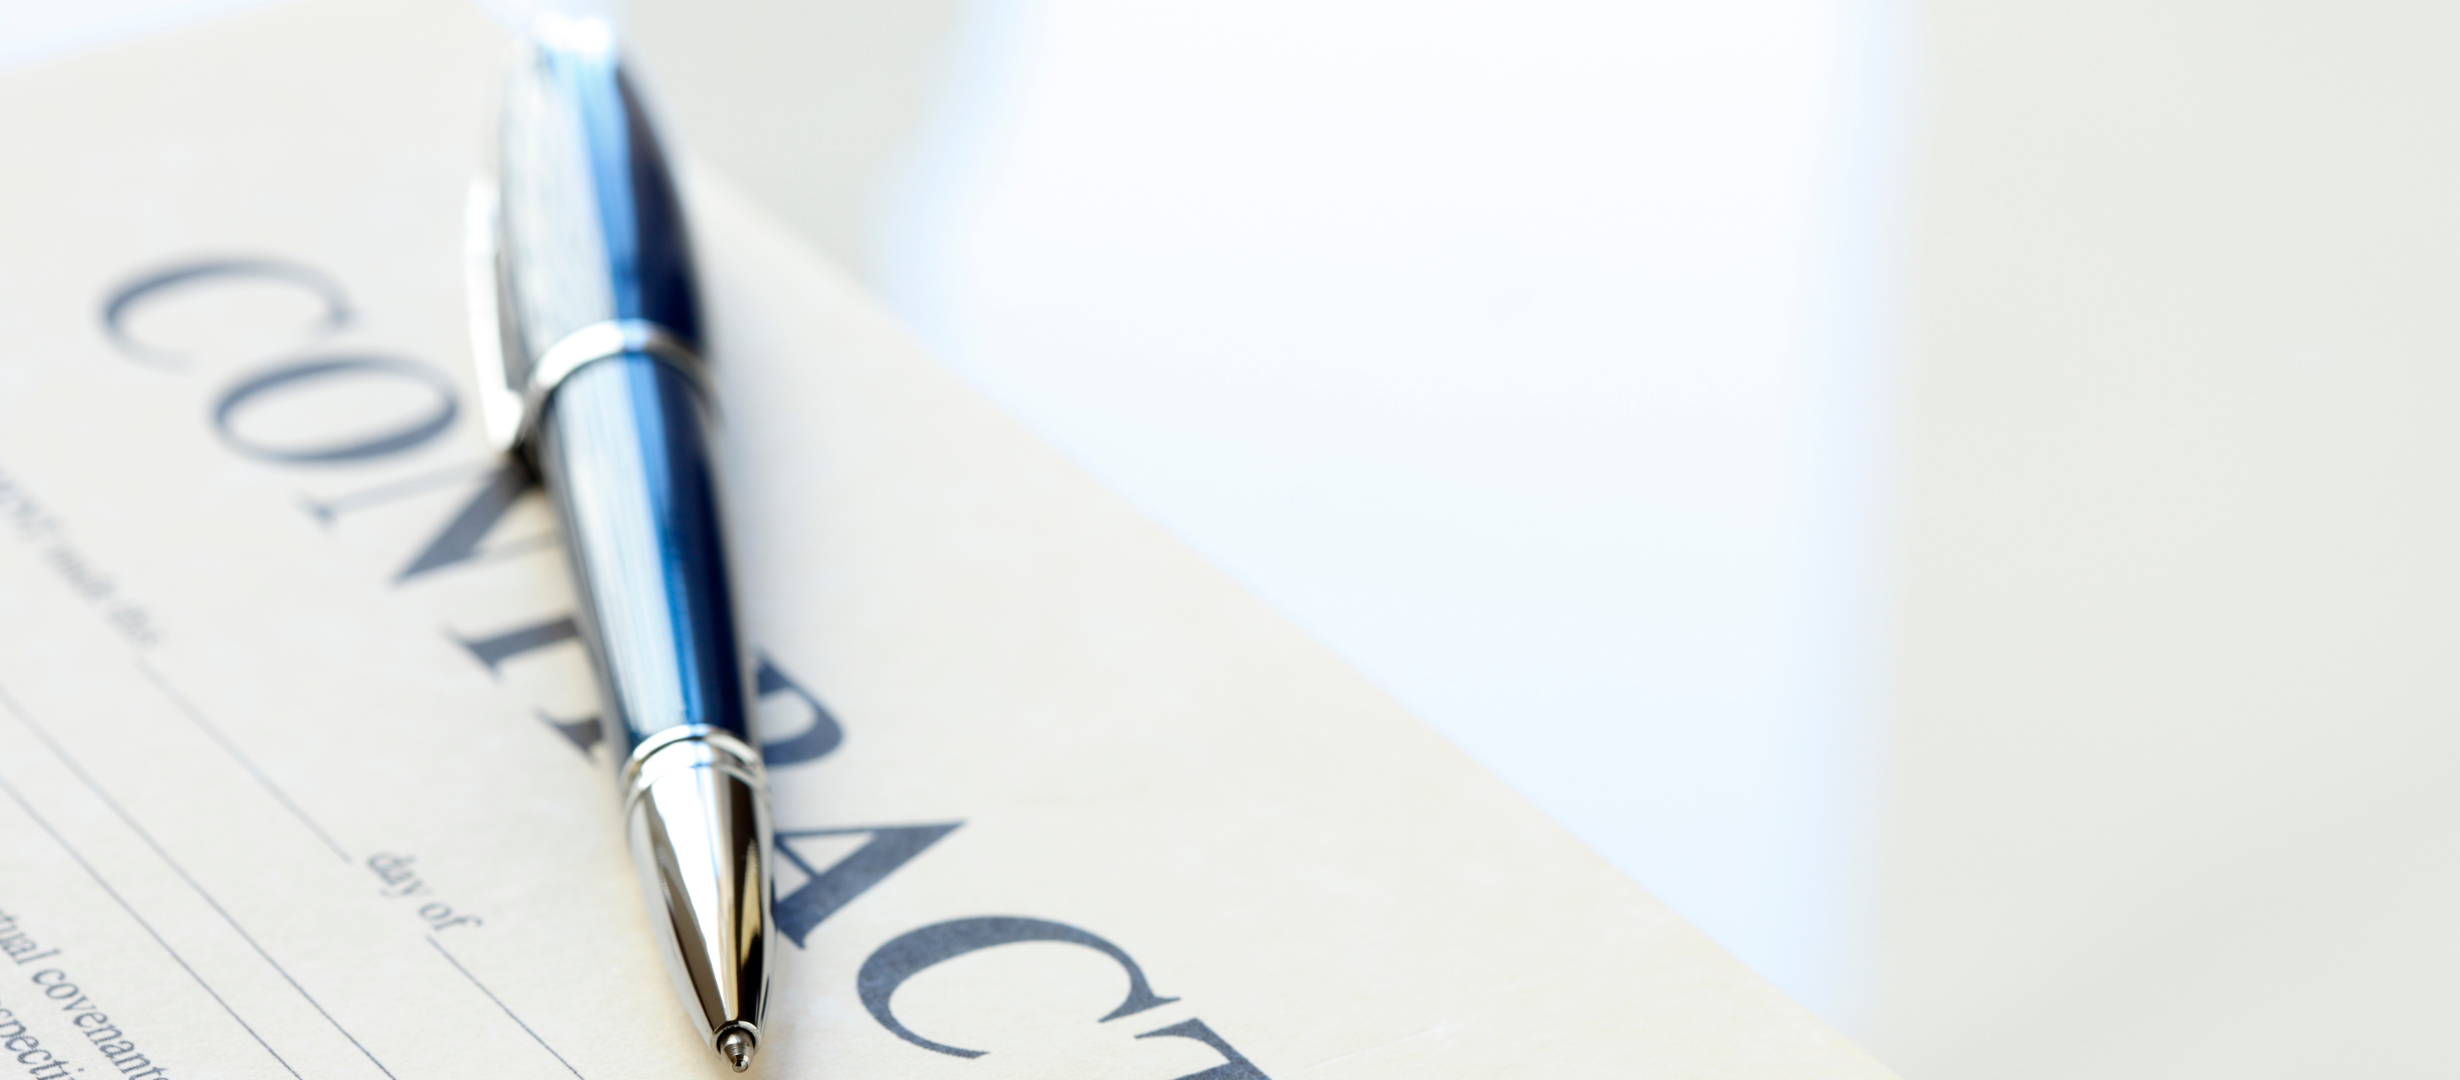 Photograph of a pen laying across an employment contract